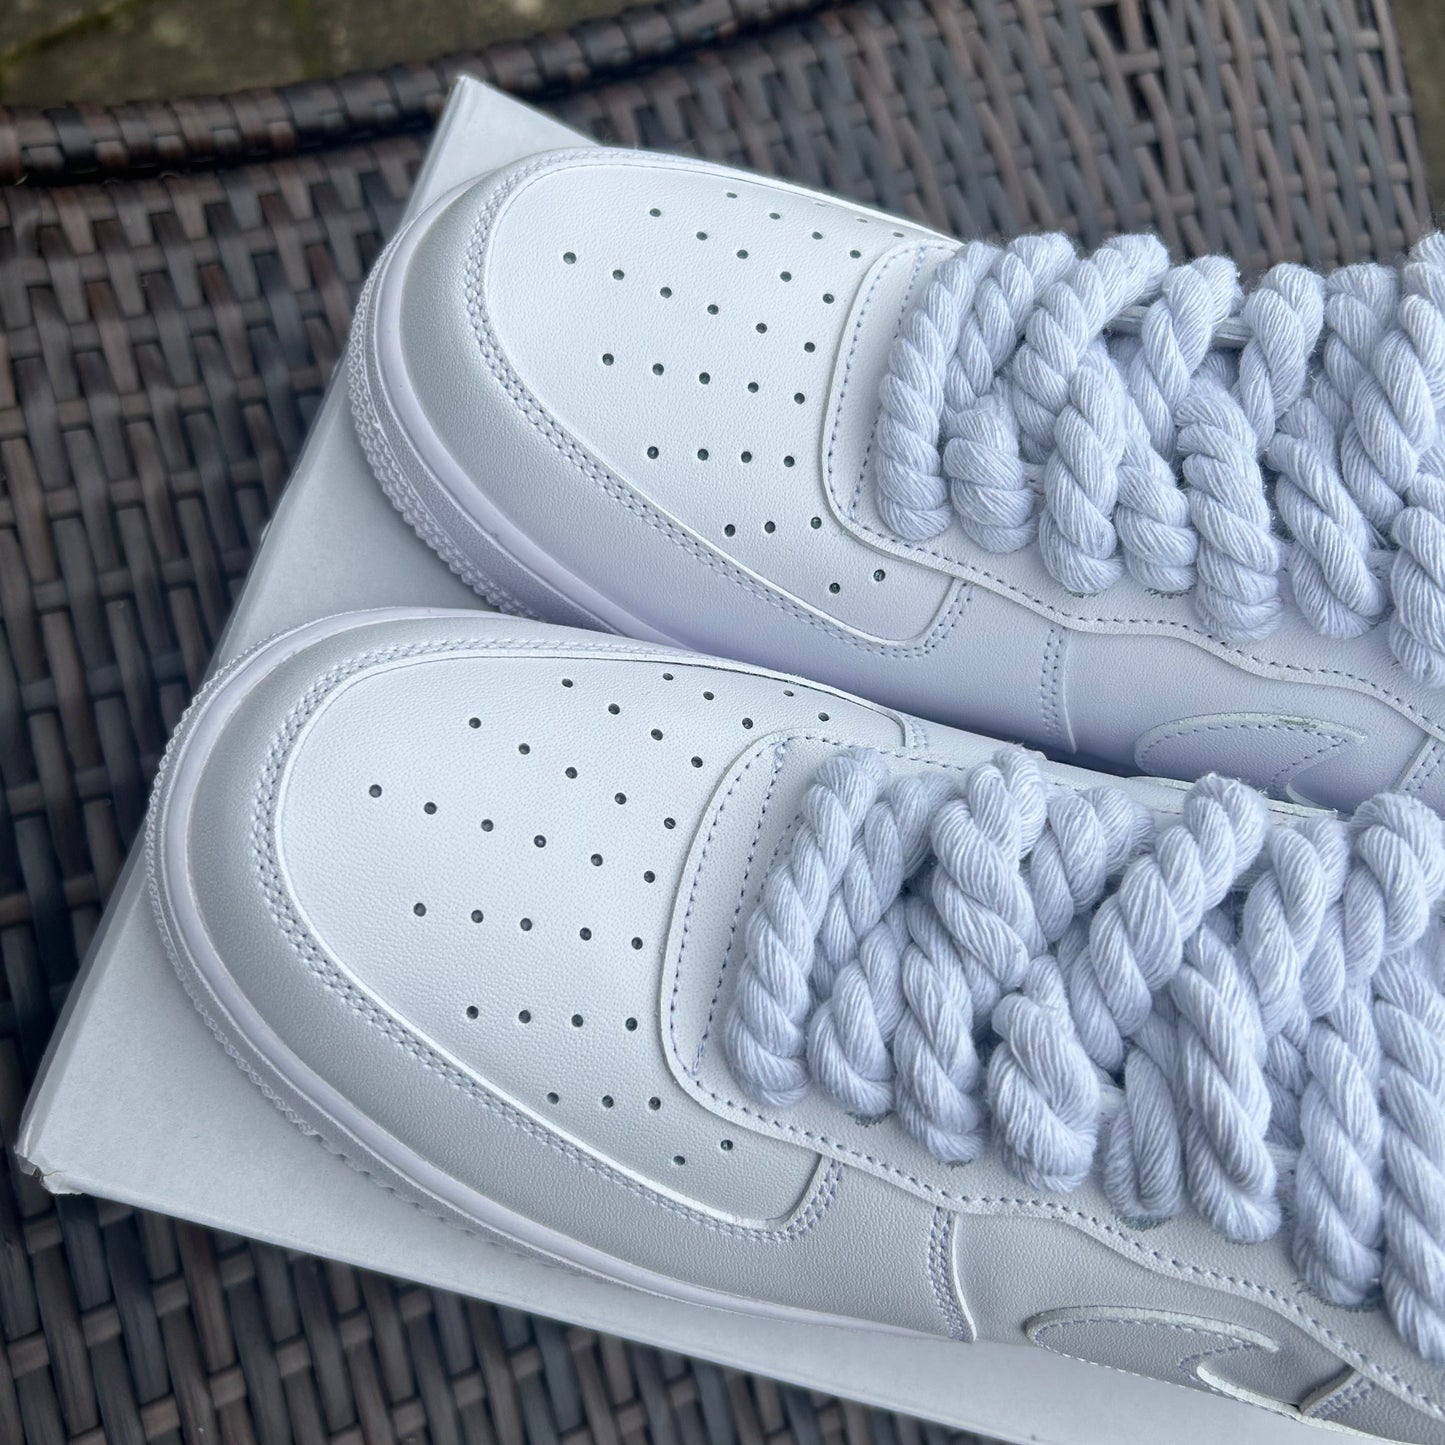 Nike White "Roped" Air force 1